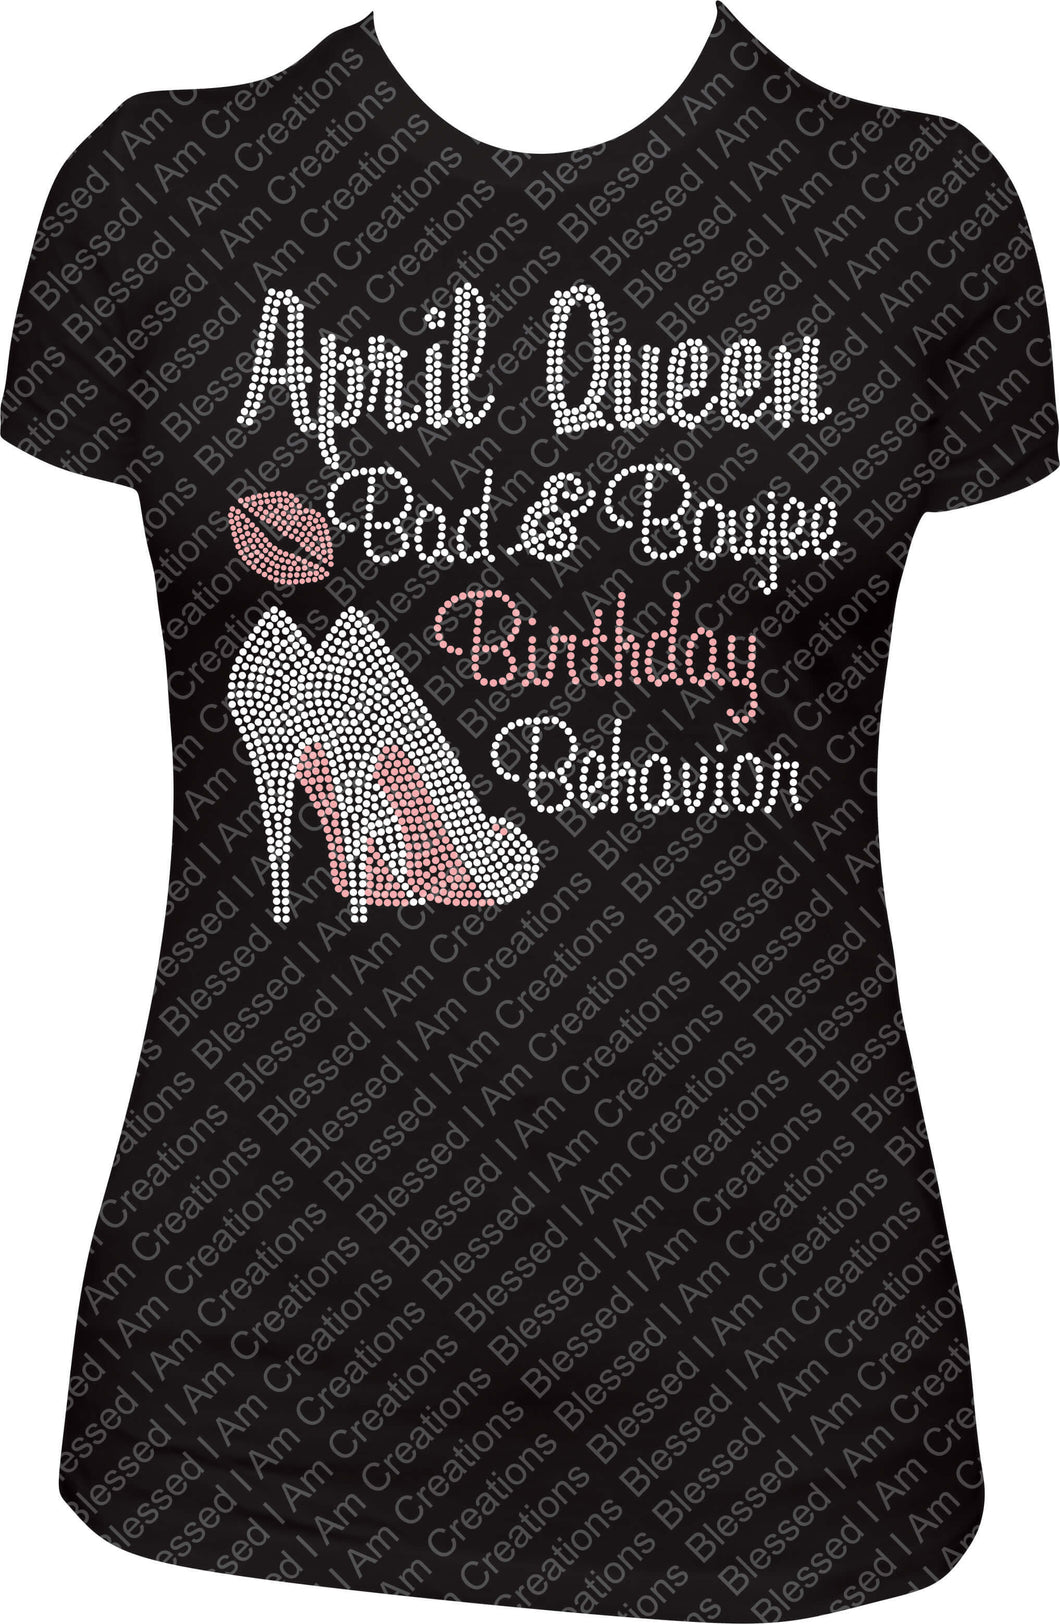 April Queen Bad and Boujee Birthday Behavior Shirt, April Queen Shirt, April Bling Shirt, Rhinestone Shirt, Bling Shirt, Bad and Boujie Shirt,